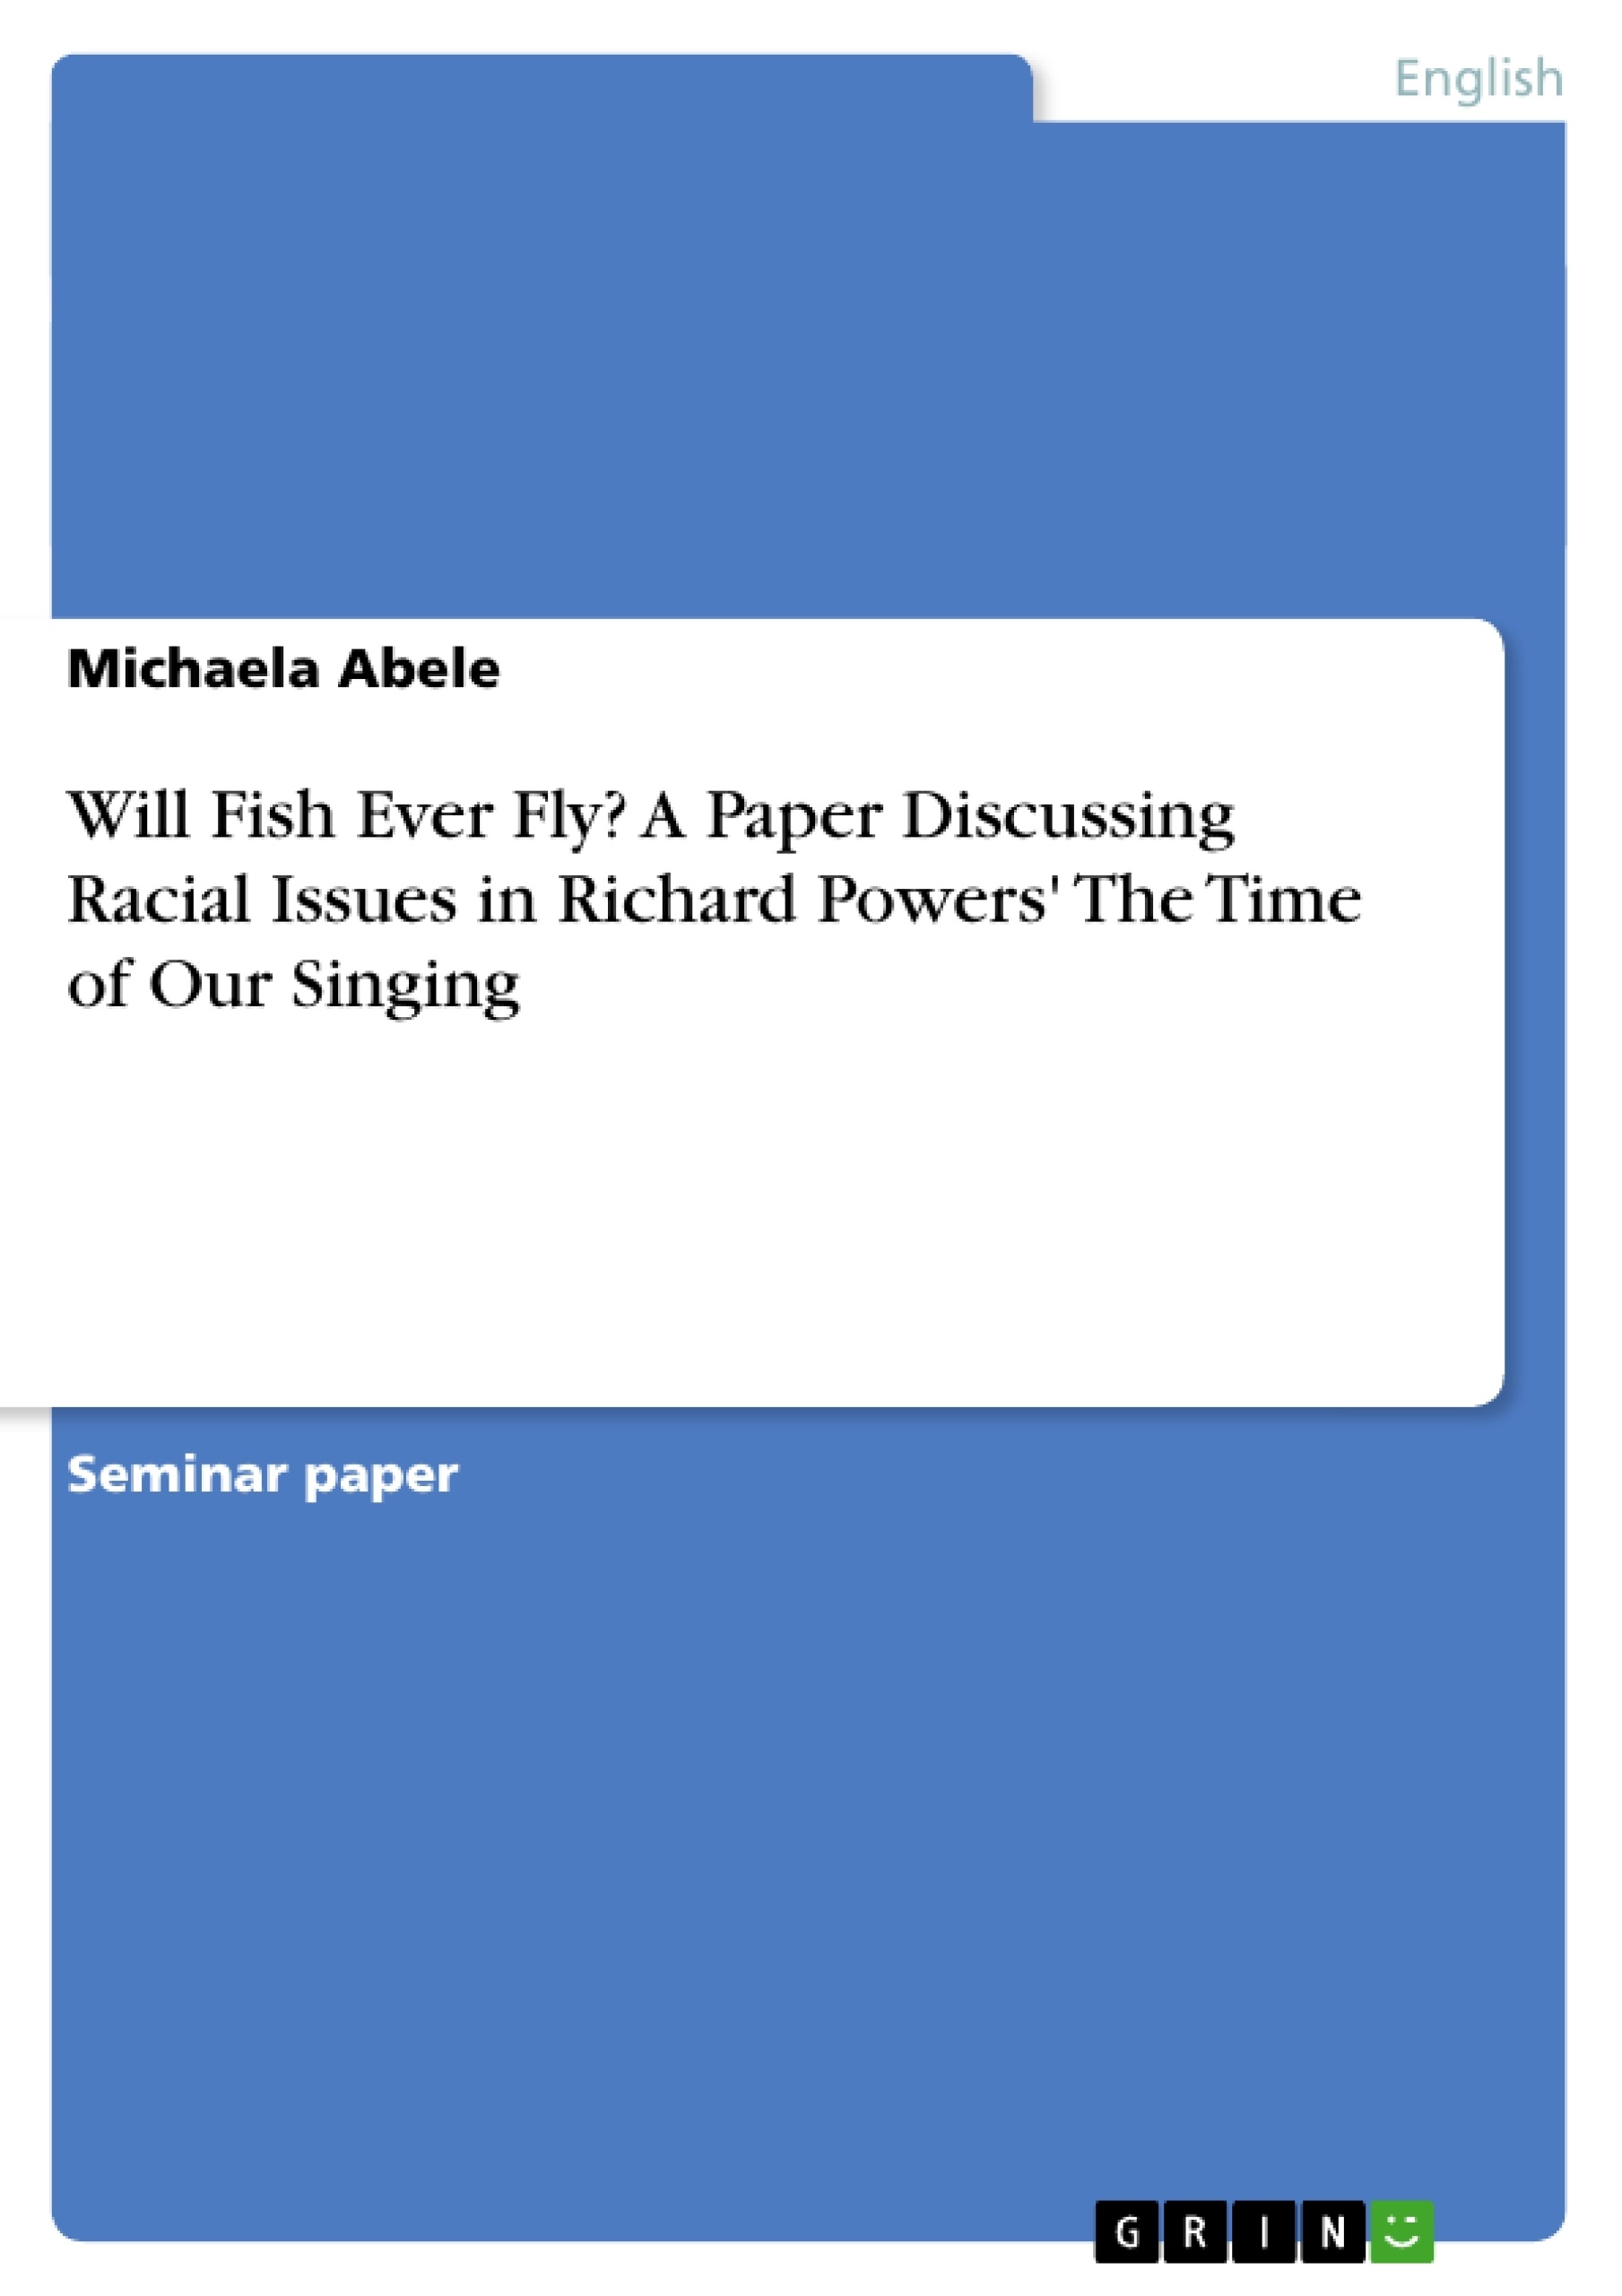 Title: Will Fish Ever Fly? A Paper Discussing Racial Issues in Richard Powers' The Time of Our Singing